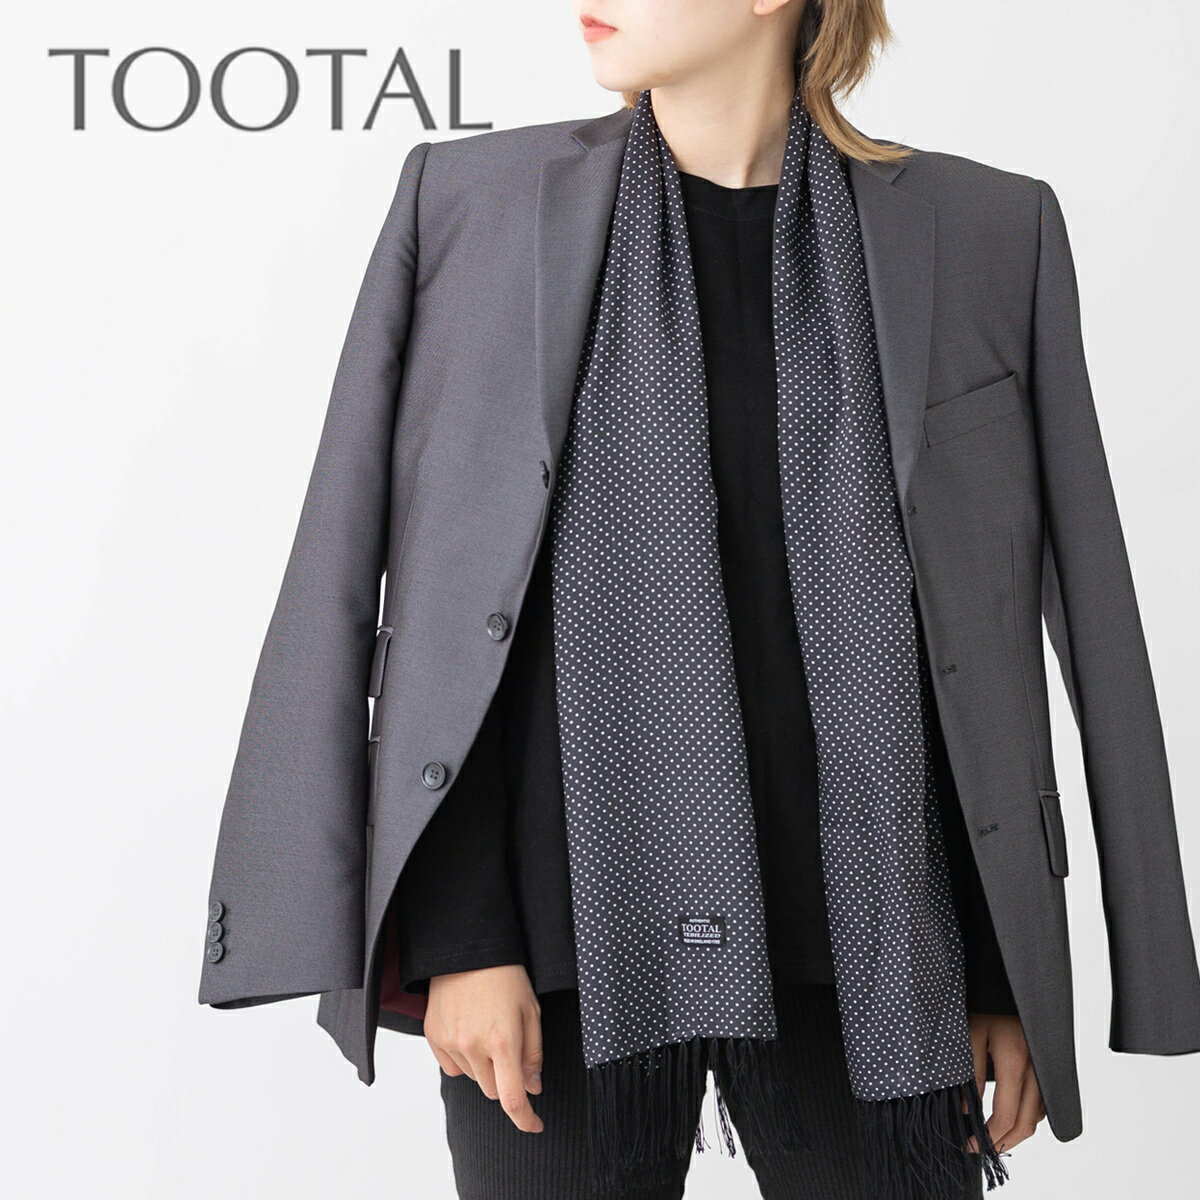 Tootal Vintage ユニセックス レーヨン 